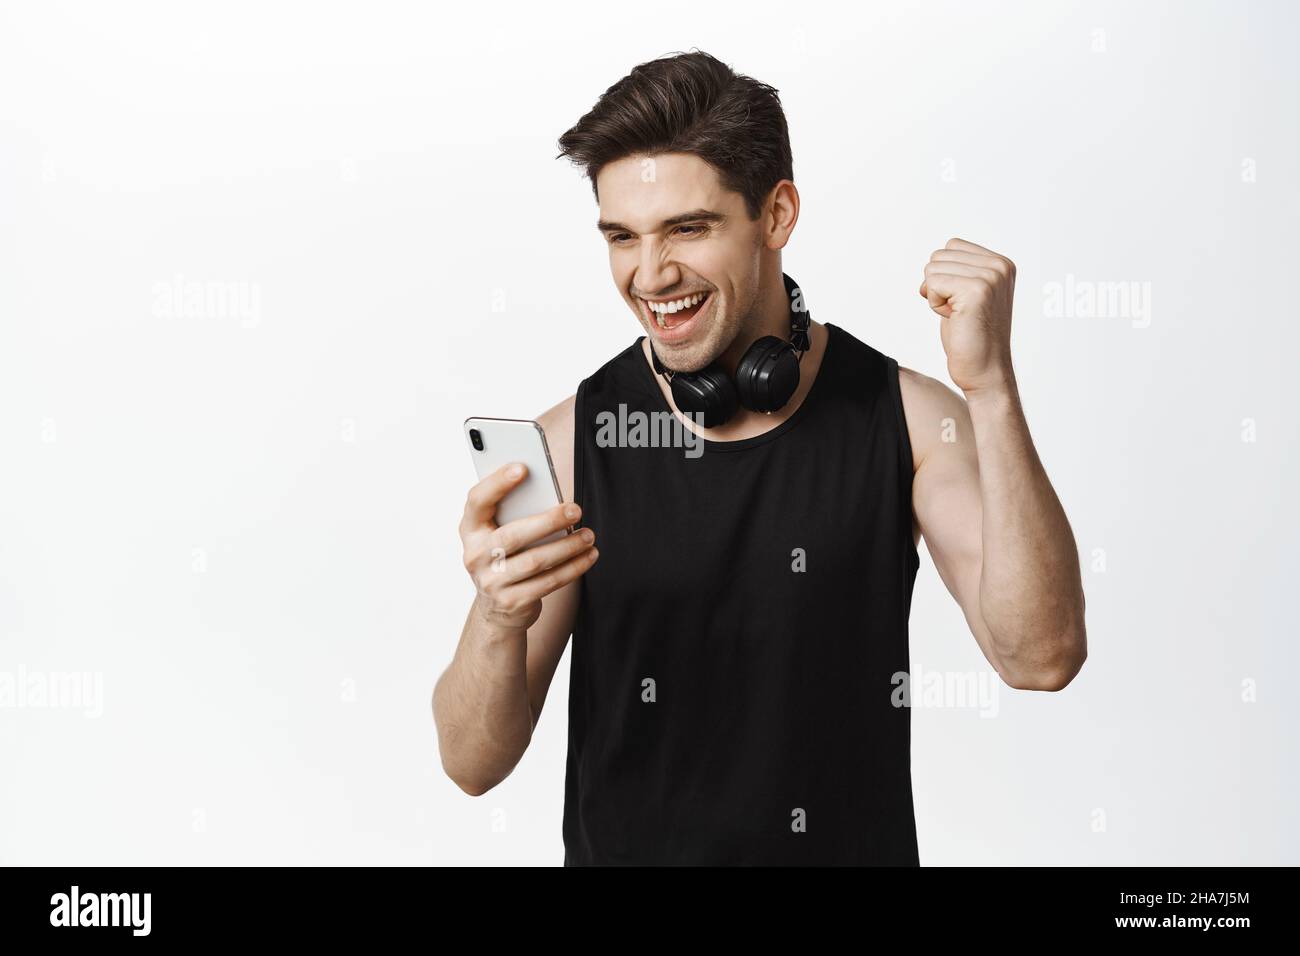 Happy guy with headphones, looking at phone and rejoicing, triumphing ...